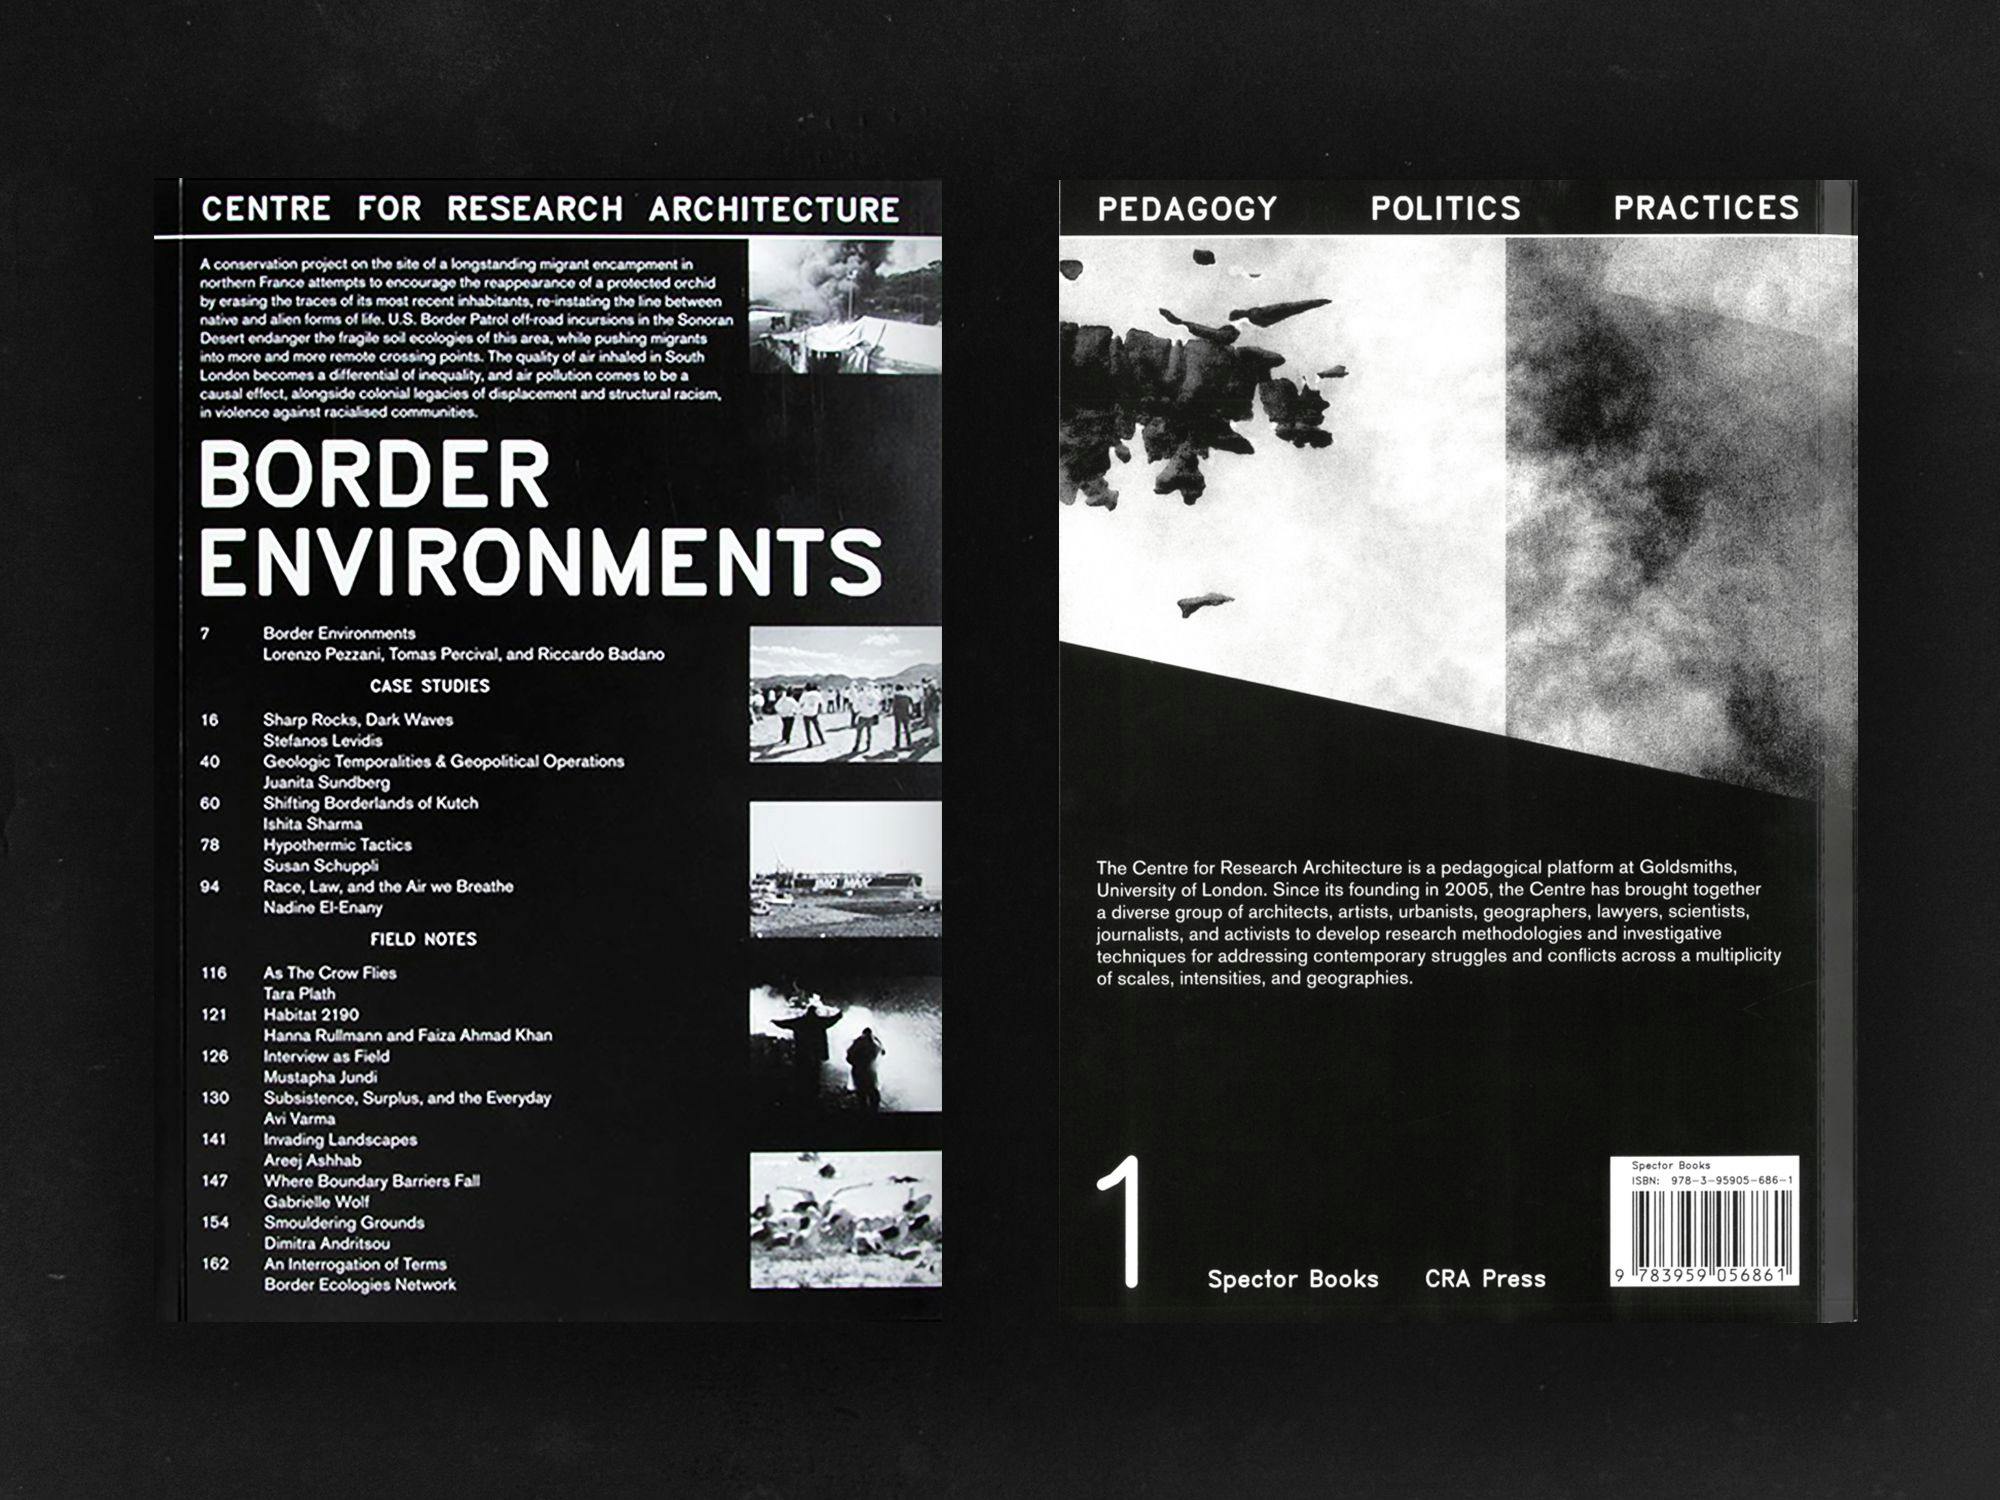 Cover and back-cover of Border Environments, the first book in the series Research Architecture: Pedagogy, Politics, Practices. [CRA Press/Spector Books]